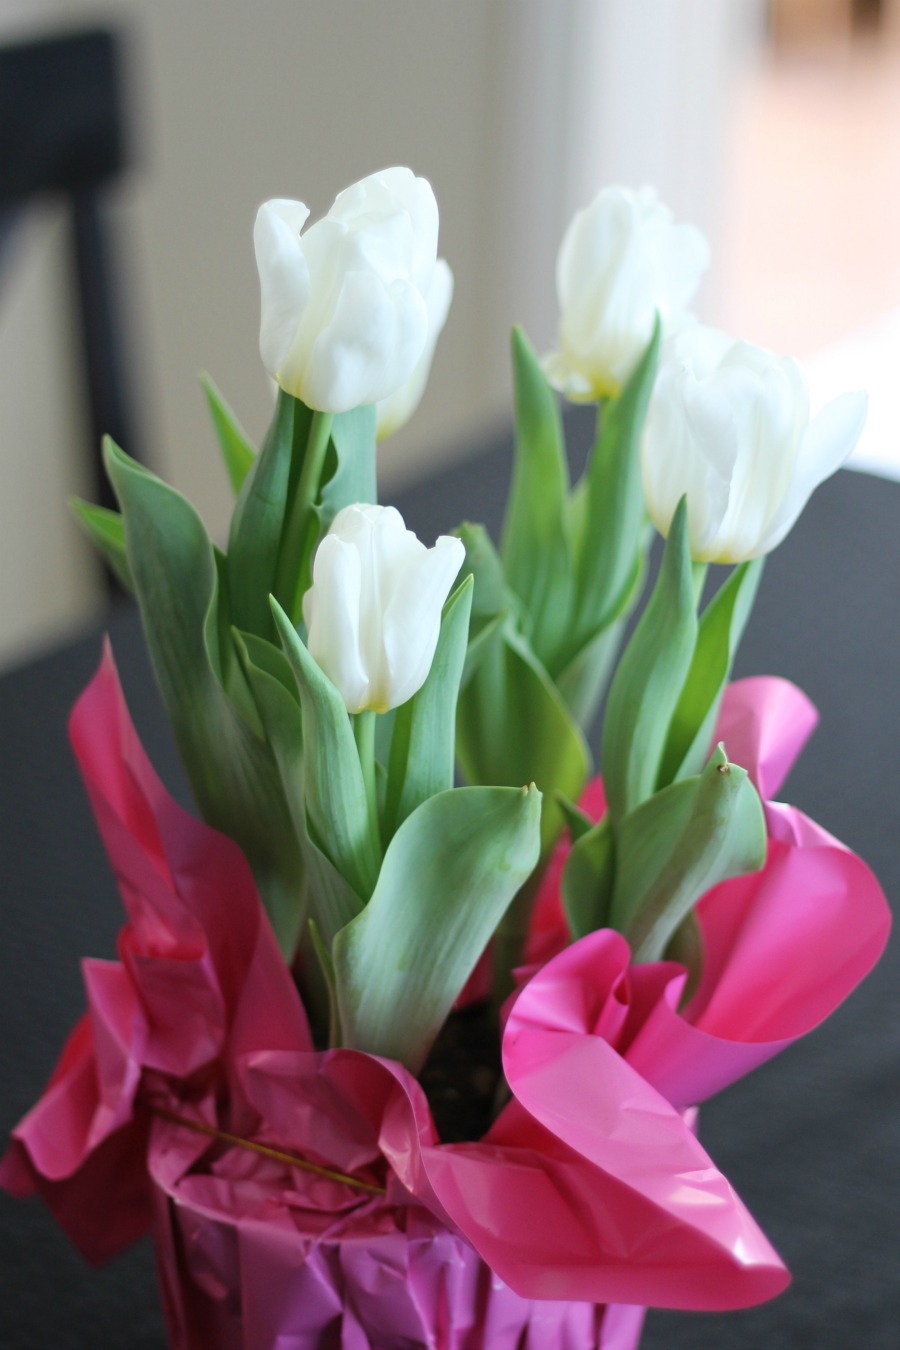 21 Things to Do Before Selling Your Home - Add fresh flowers.